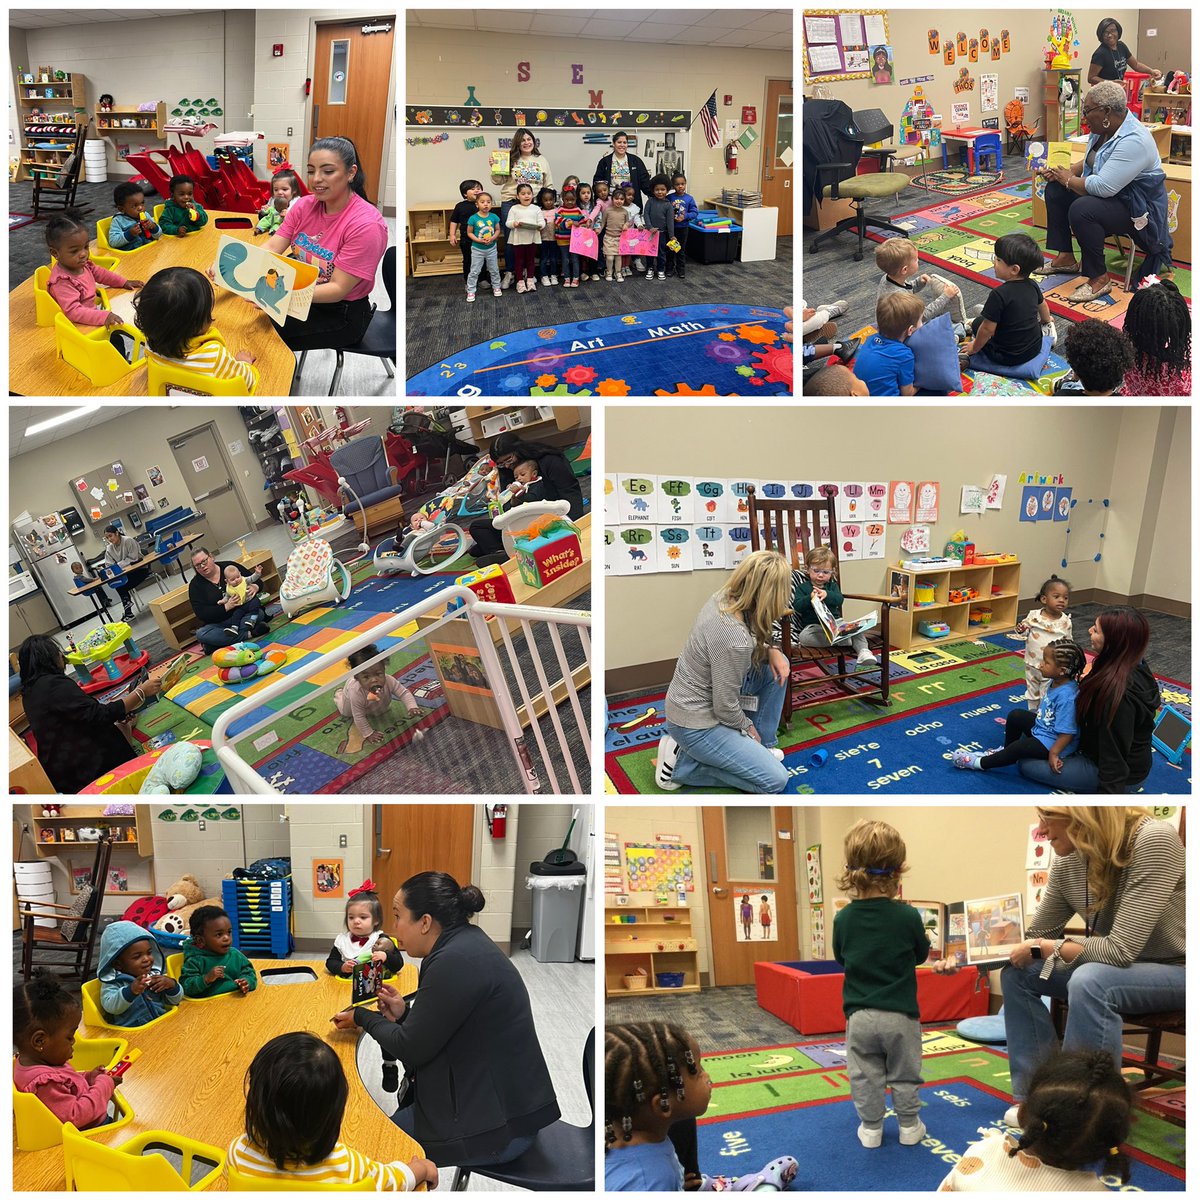 Today we had “Read Across Sheldon”
We would like to say thank you to all of our special guests for coming out and reading to our little learners. #BeTheVillage #ReadAcrossSheldon #ReadingMatters #SheldonISD